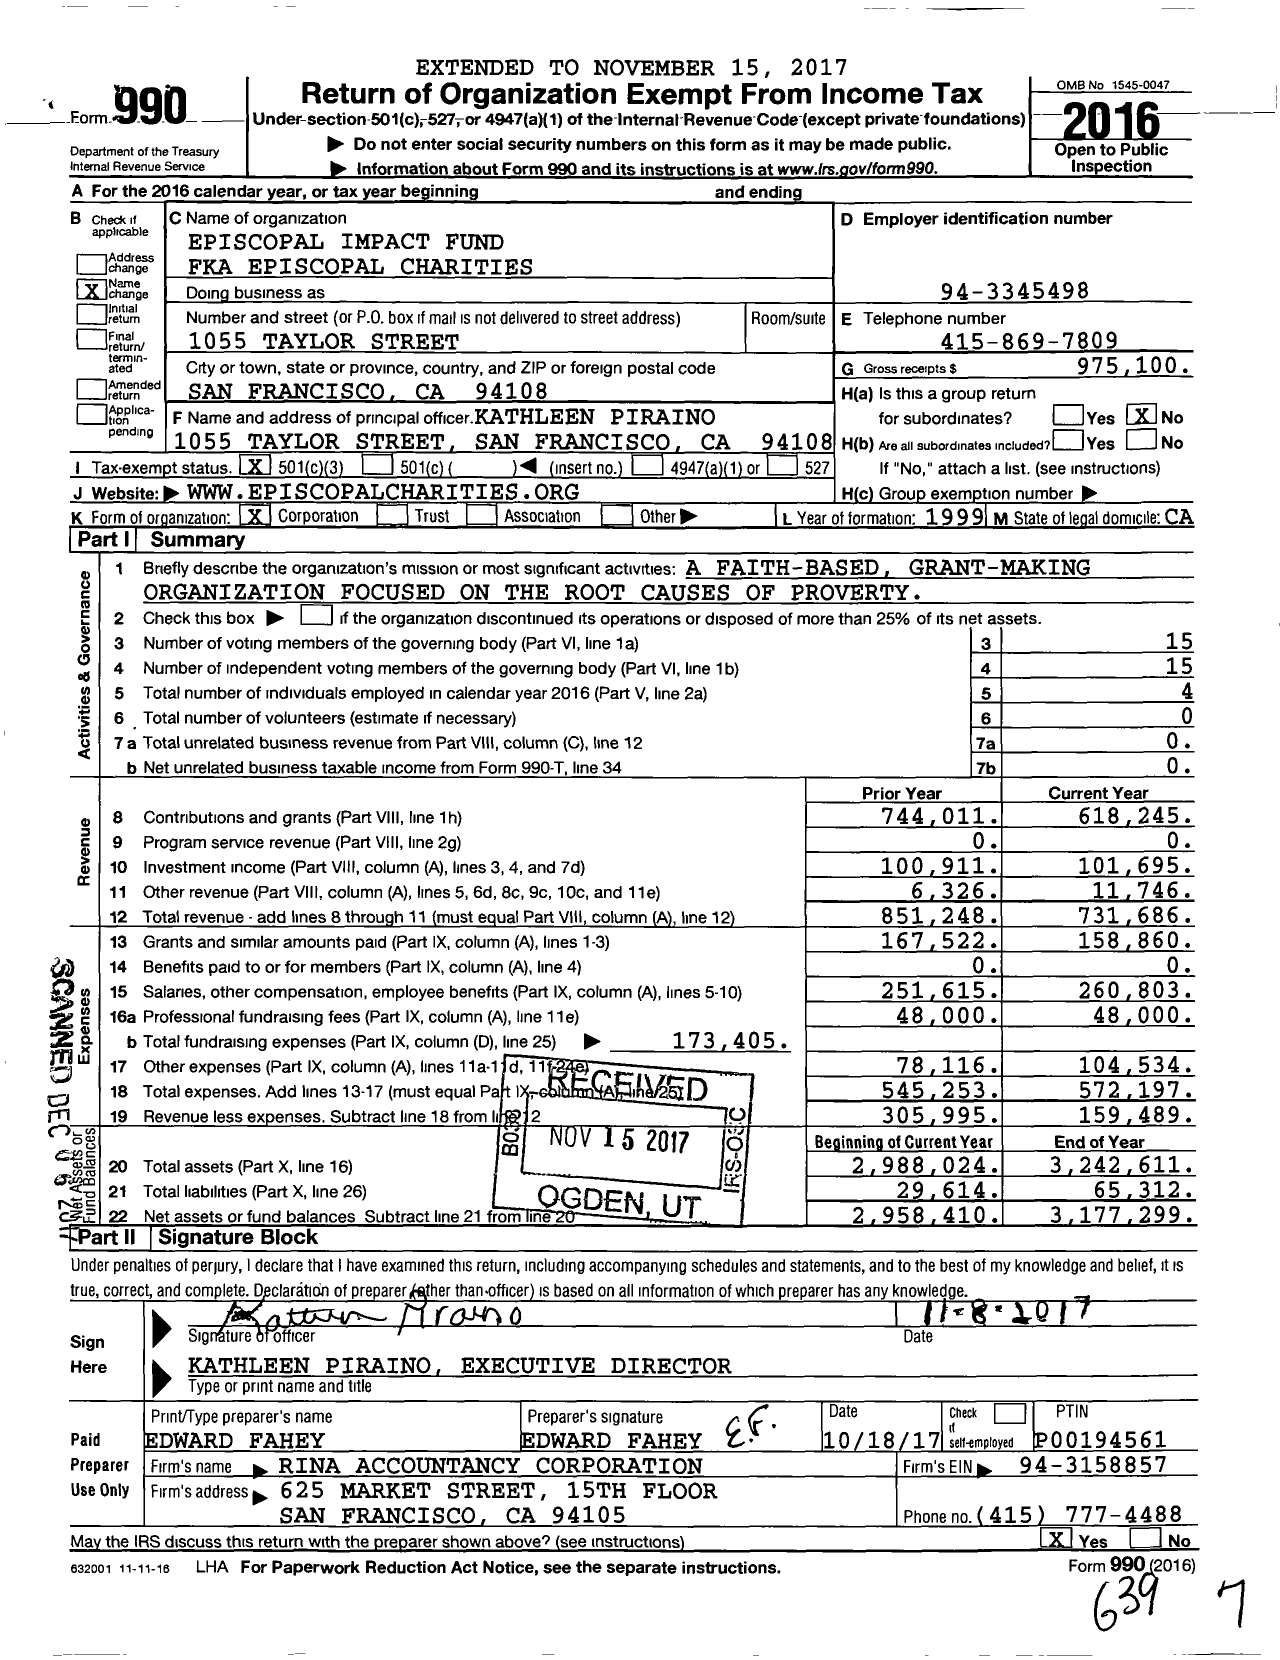 Image of first page of 2016 Form 990 for Episcopal Impact Fund